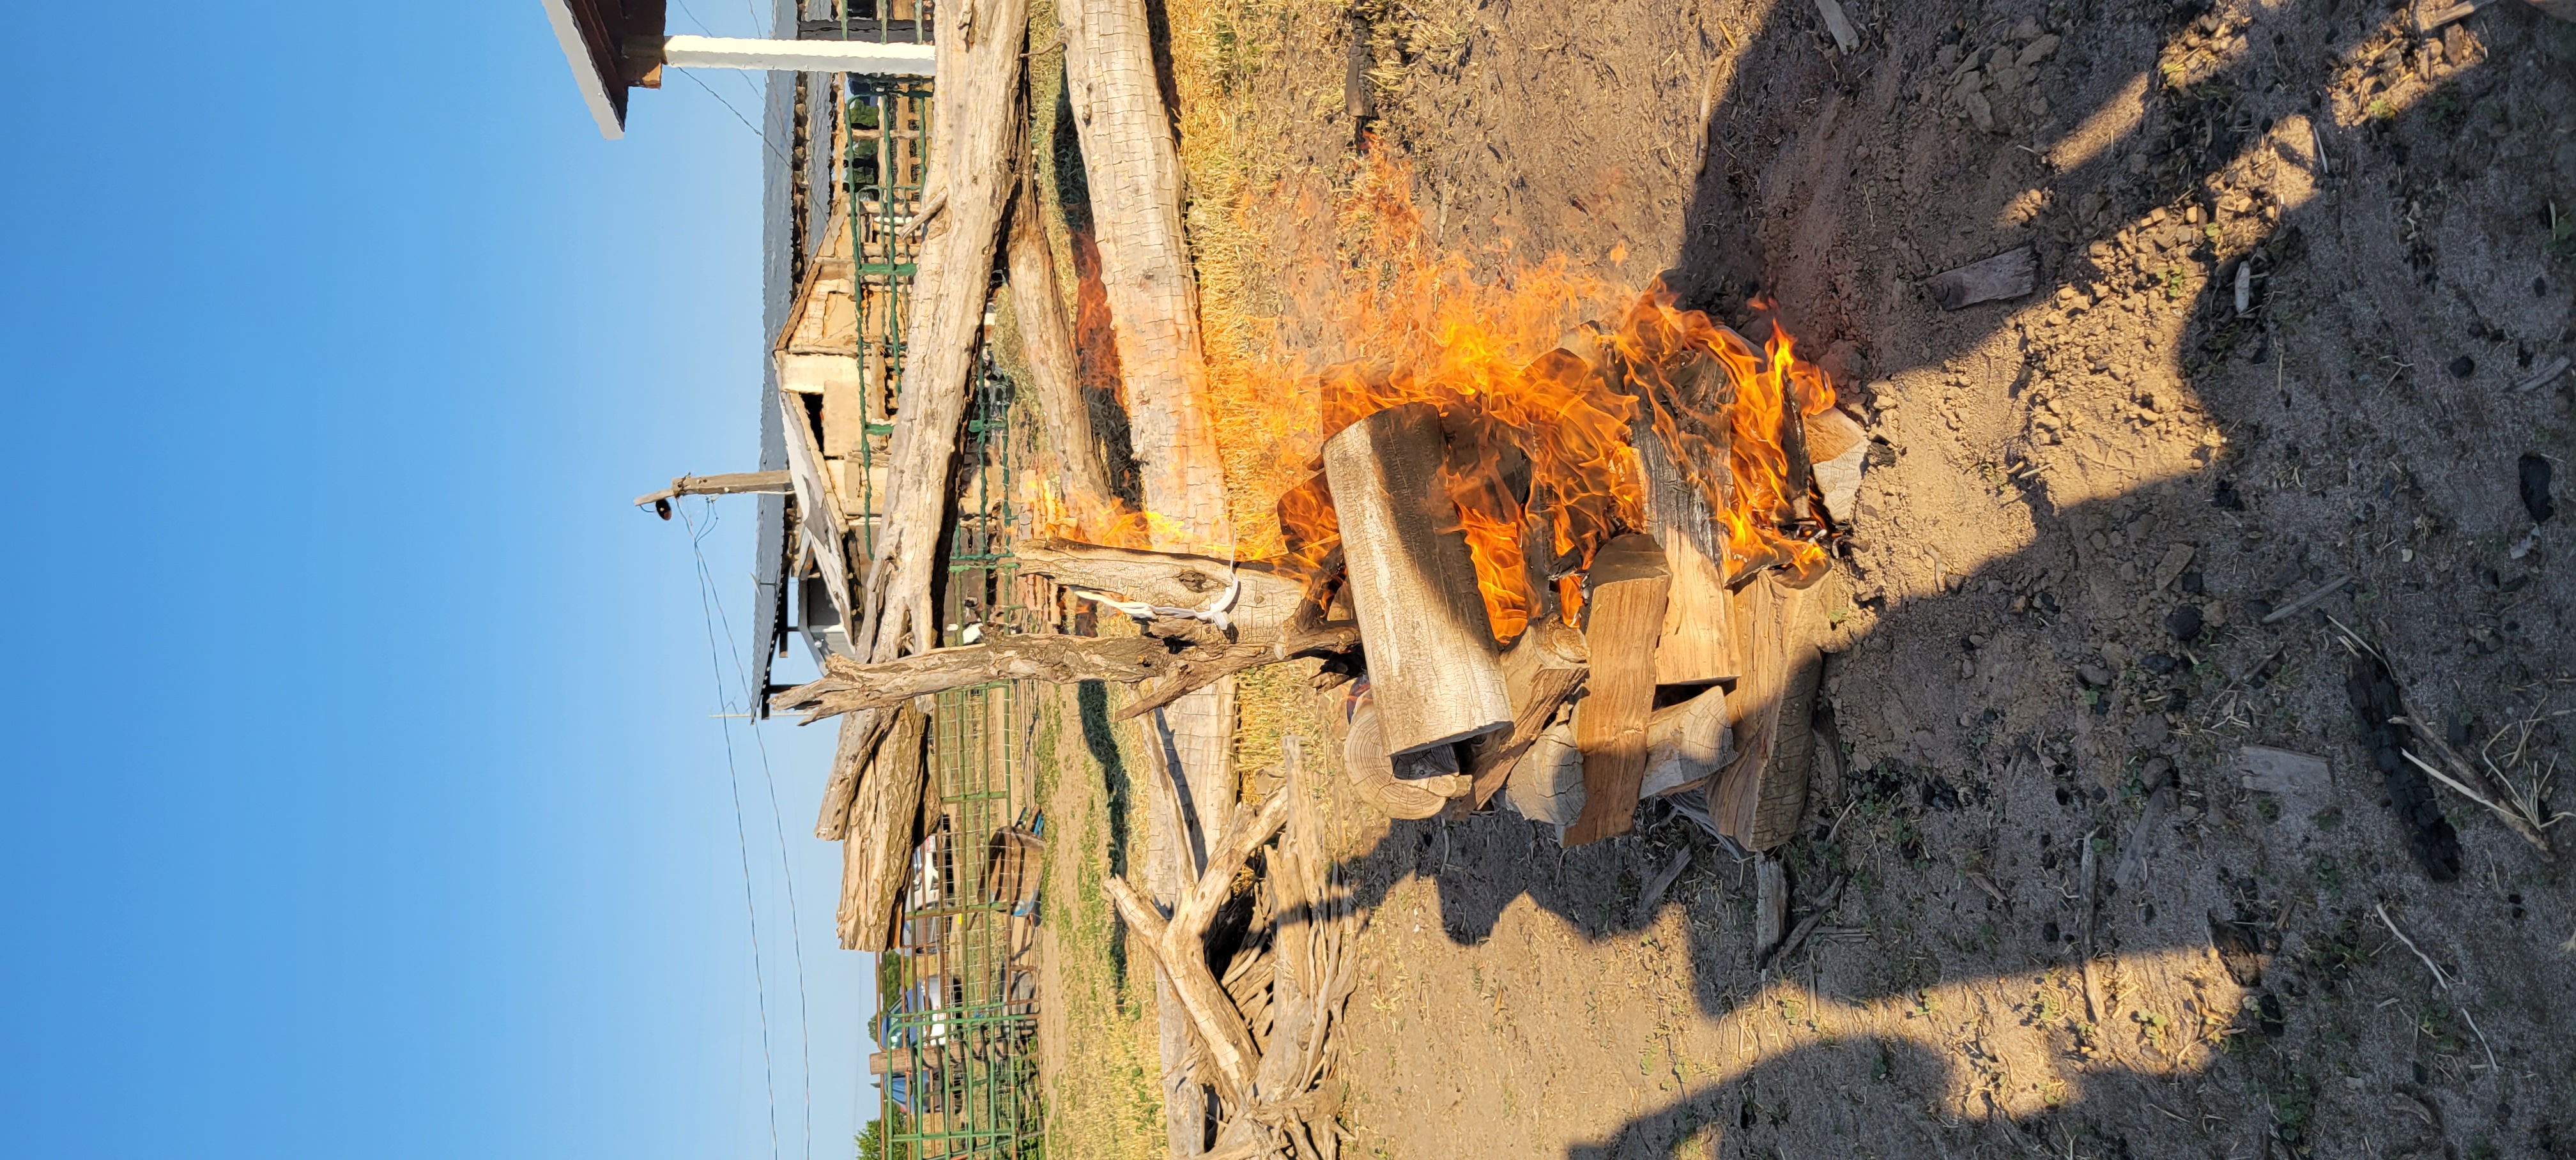 A pyre to burn Asher's tube support. A single log standing vertical with layers of hardwood log rings around. The fire is almost to the top where the tube support rests.